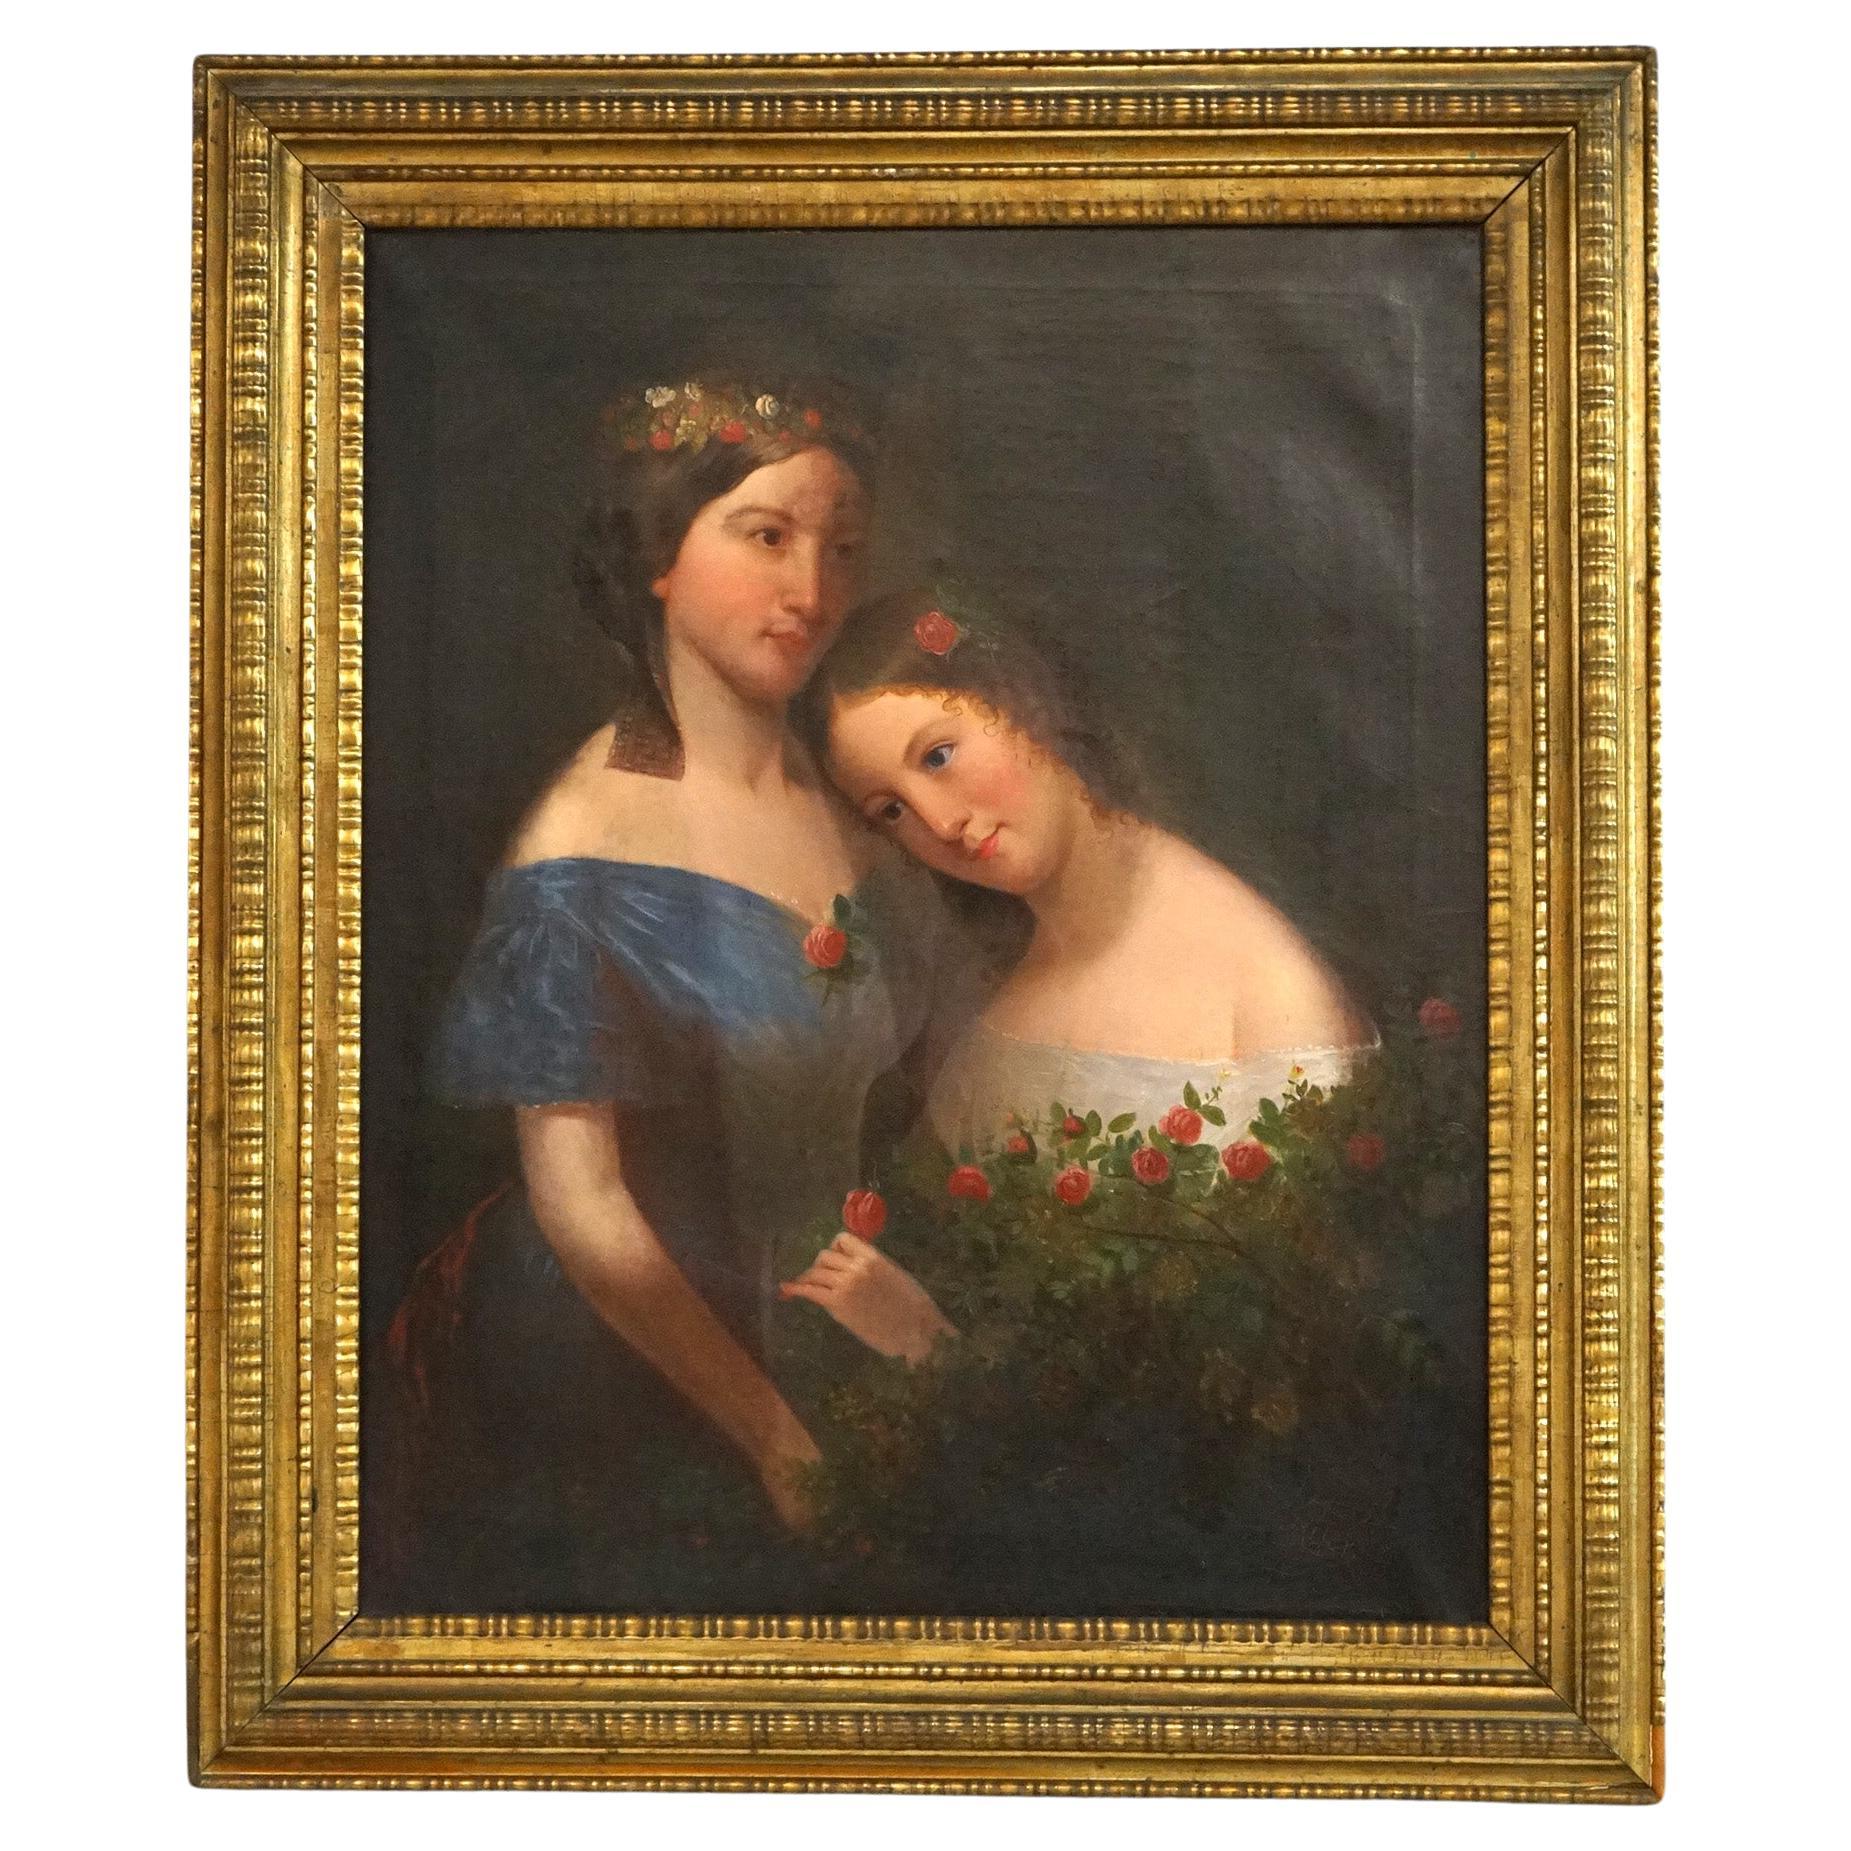 Antique Double Portrait Oil Painting with Roses & Original Giltwood Frame c1840 For Sale